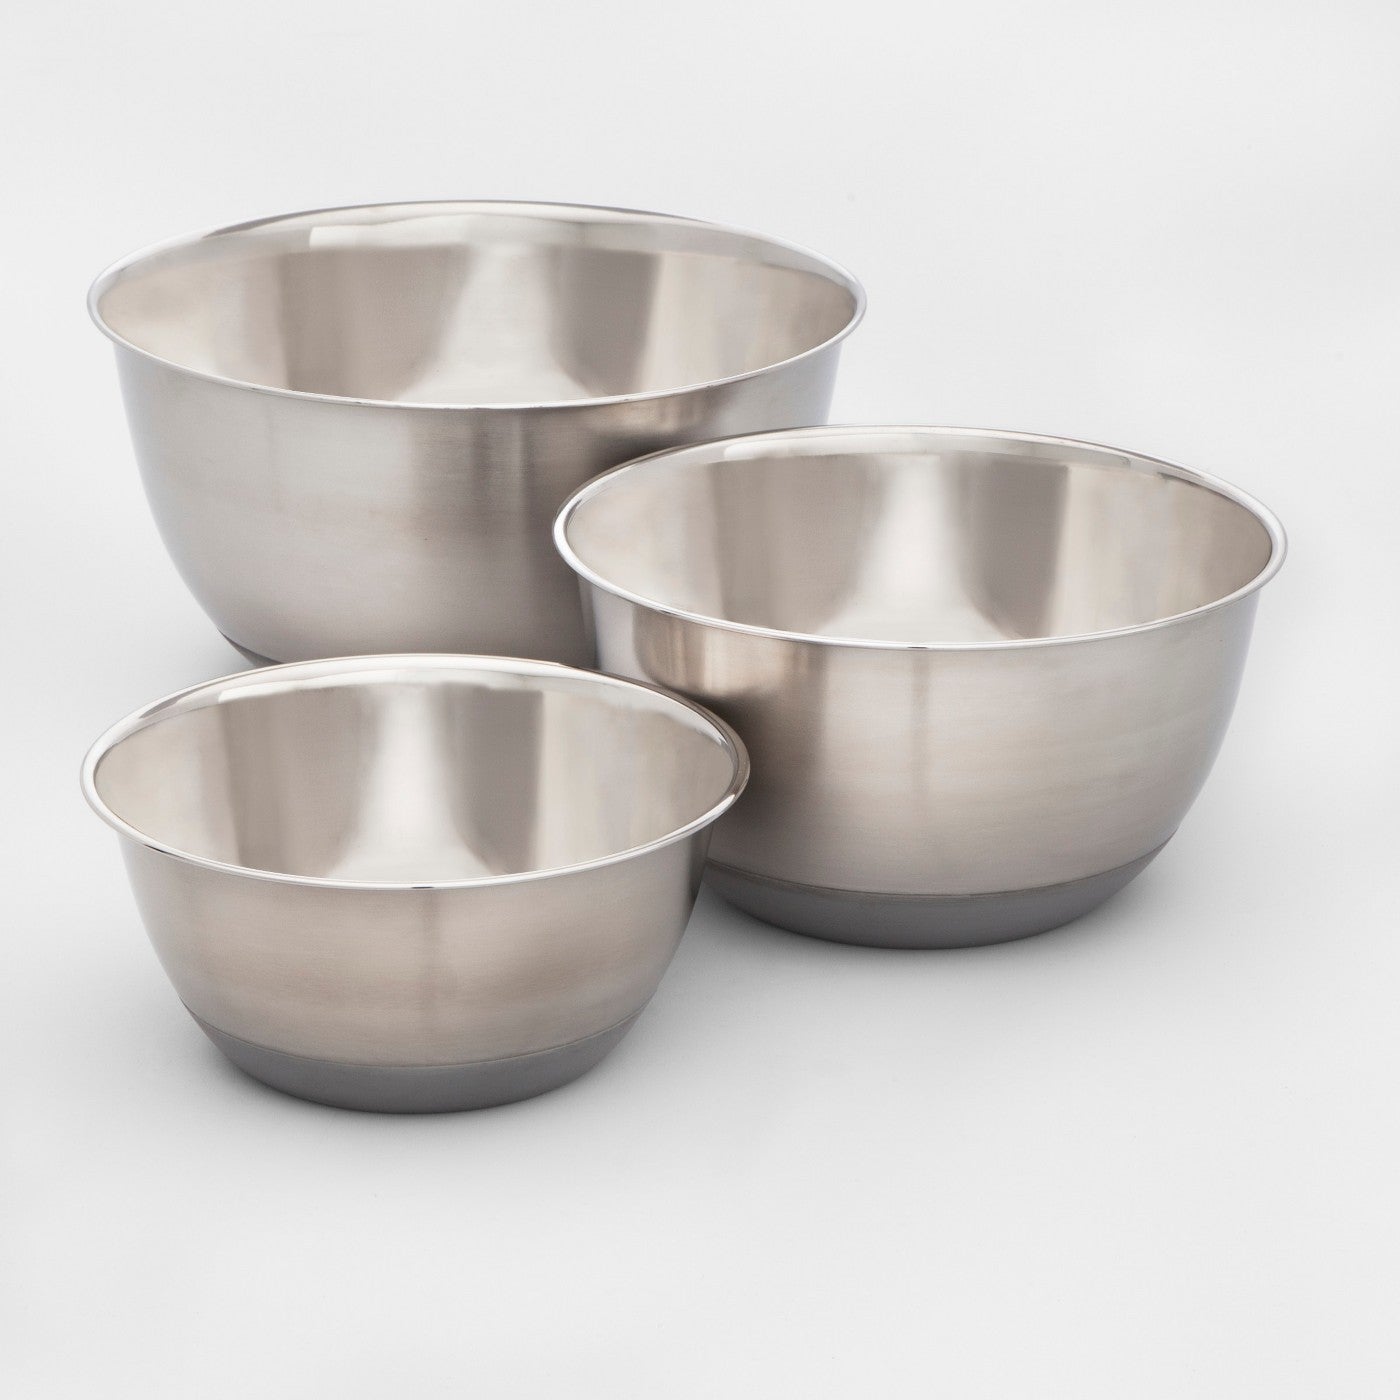 Set of 3 Non-Slip Mixing Bowls Stainless Steel